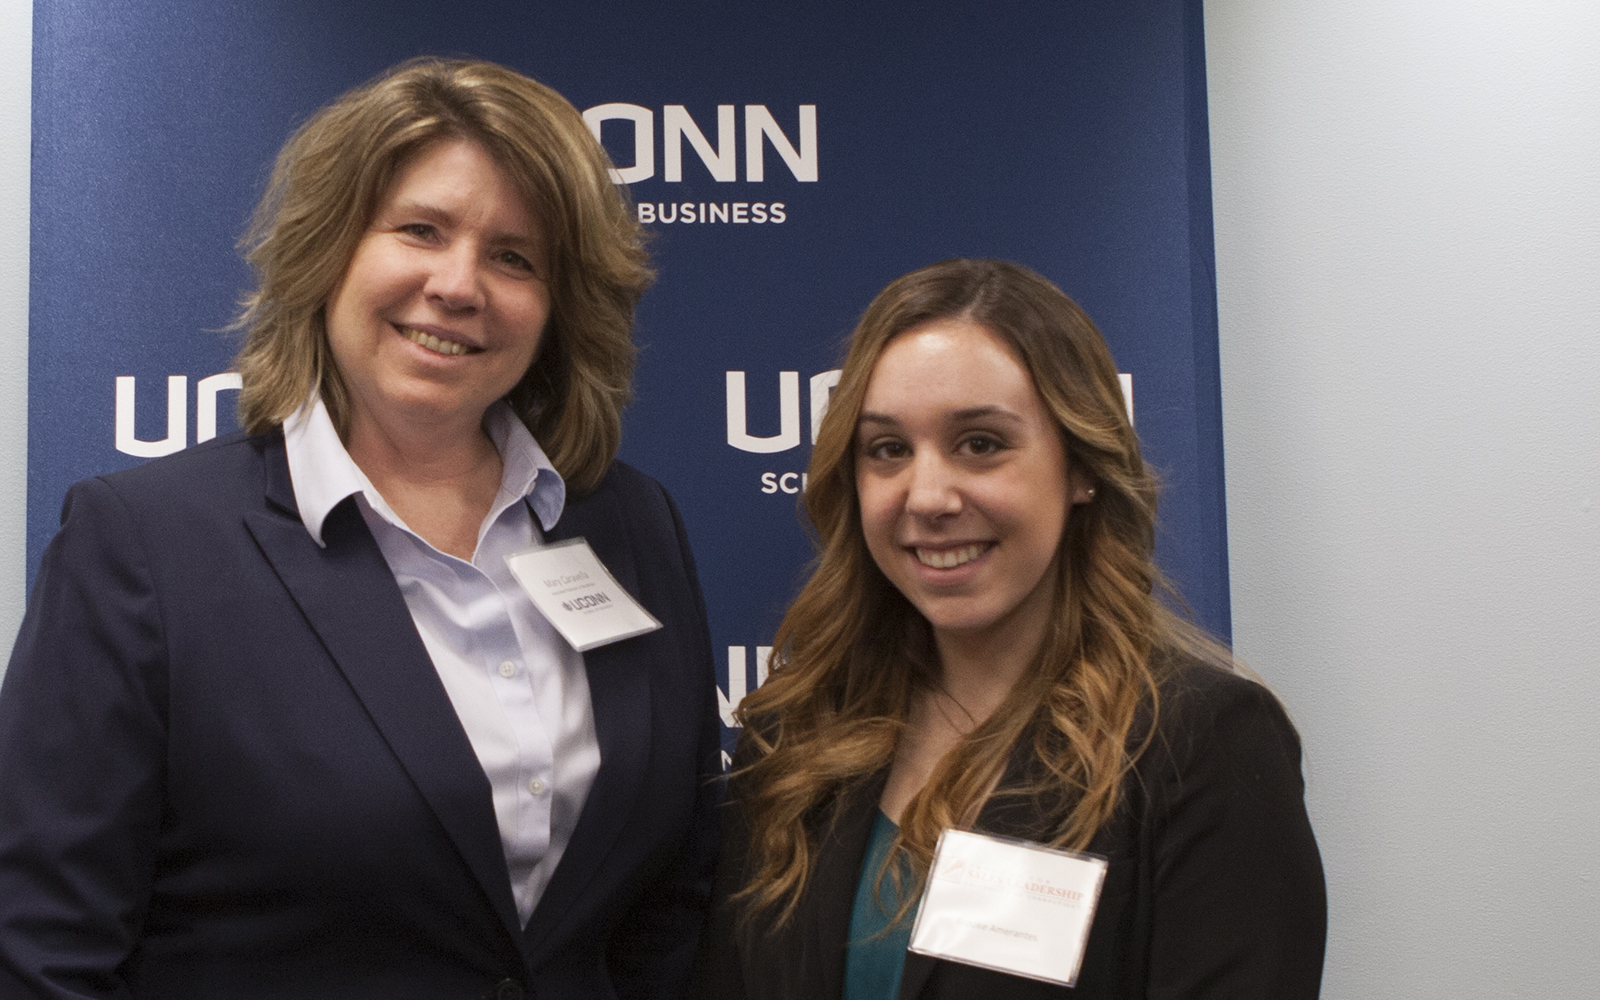 Professor Caravella and I at a Professional Sales Leadership event in March 2015. (Emily Vasington/UConn School of Business)